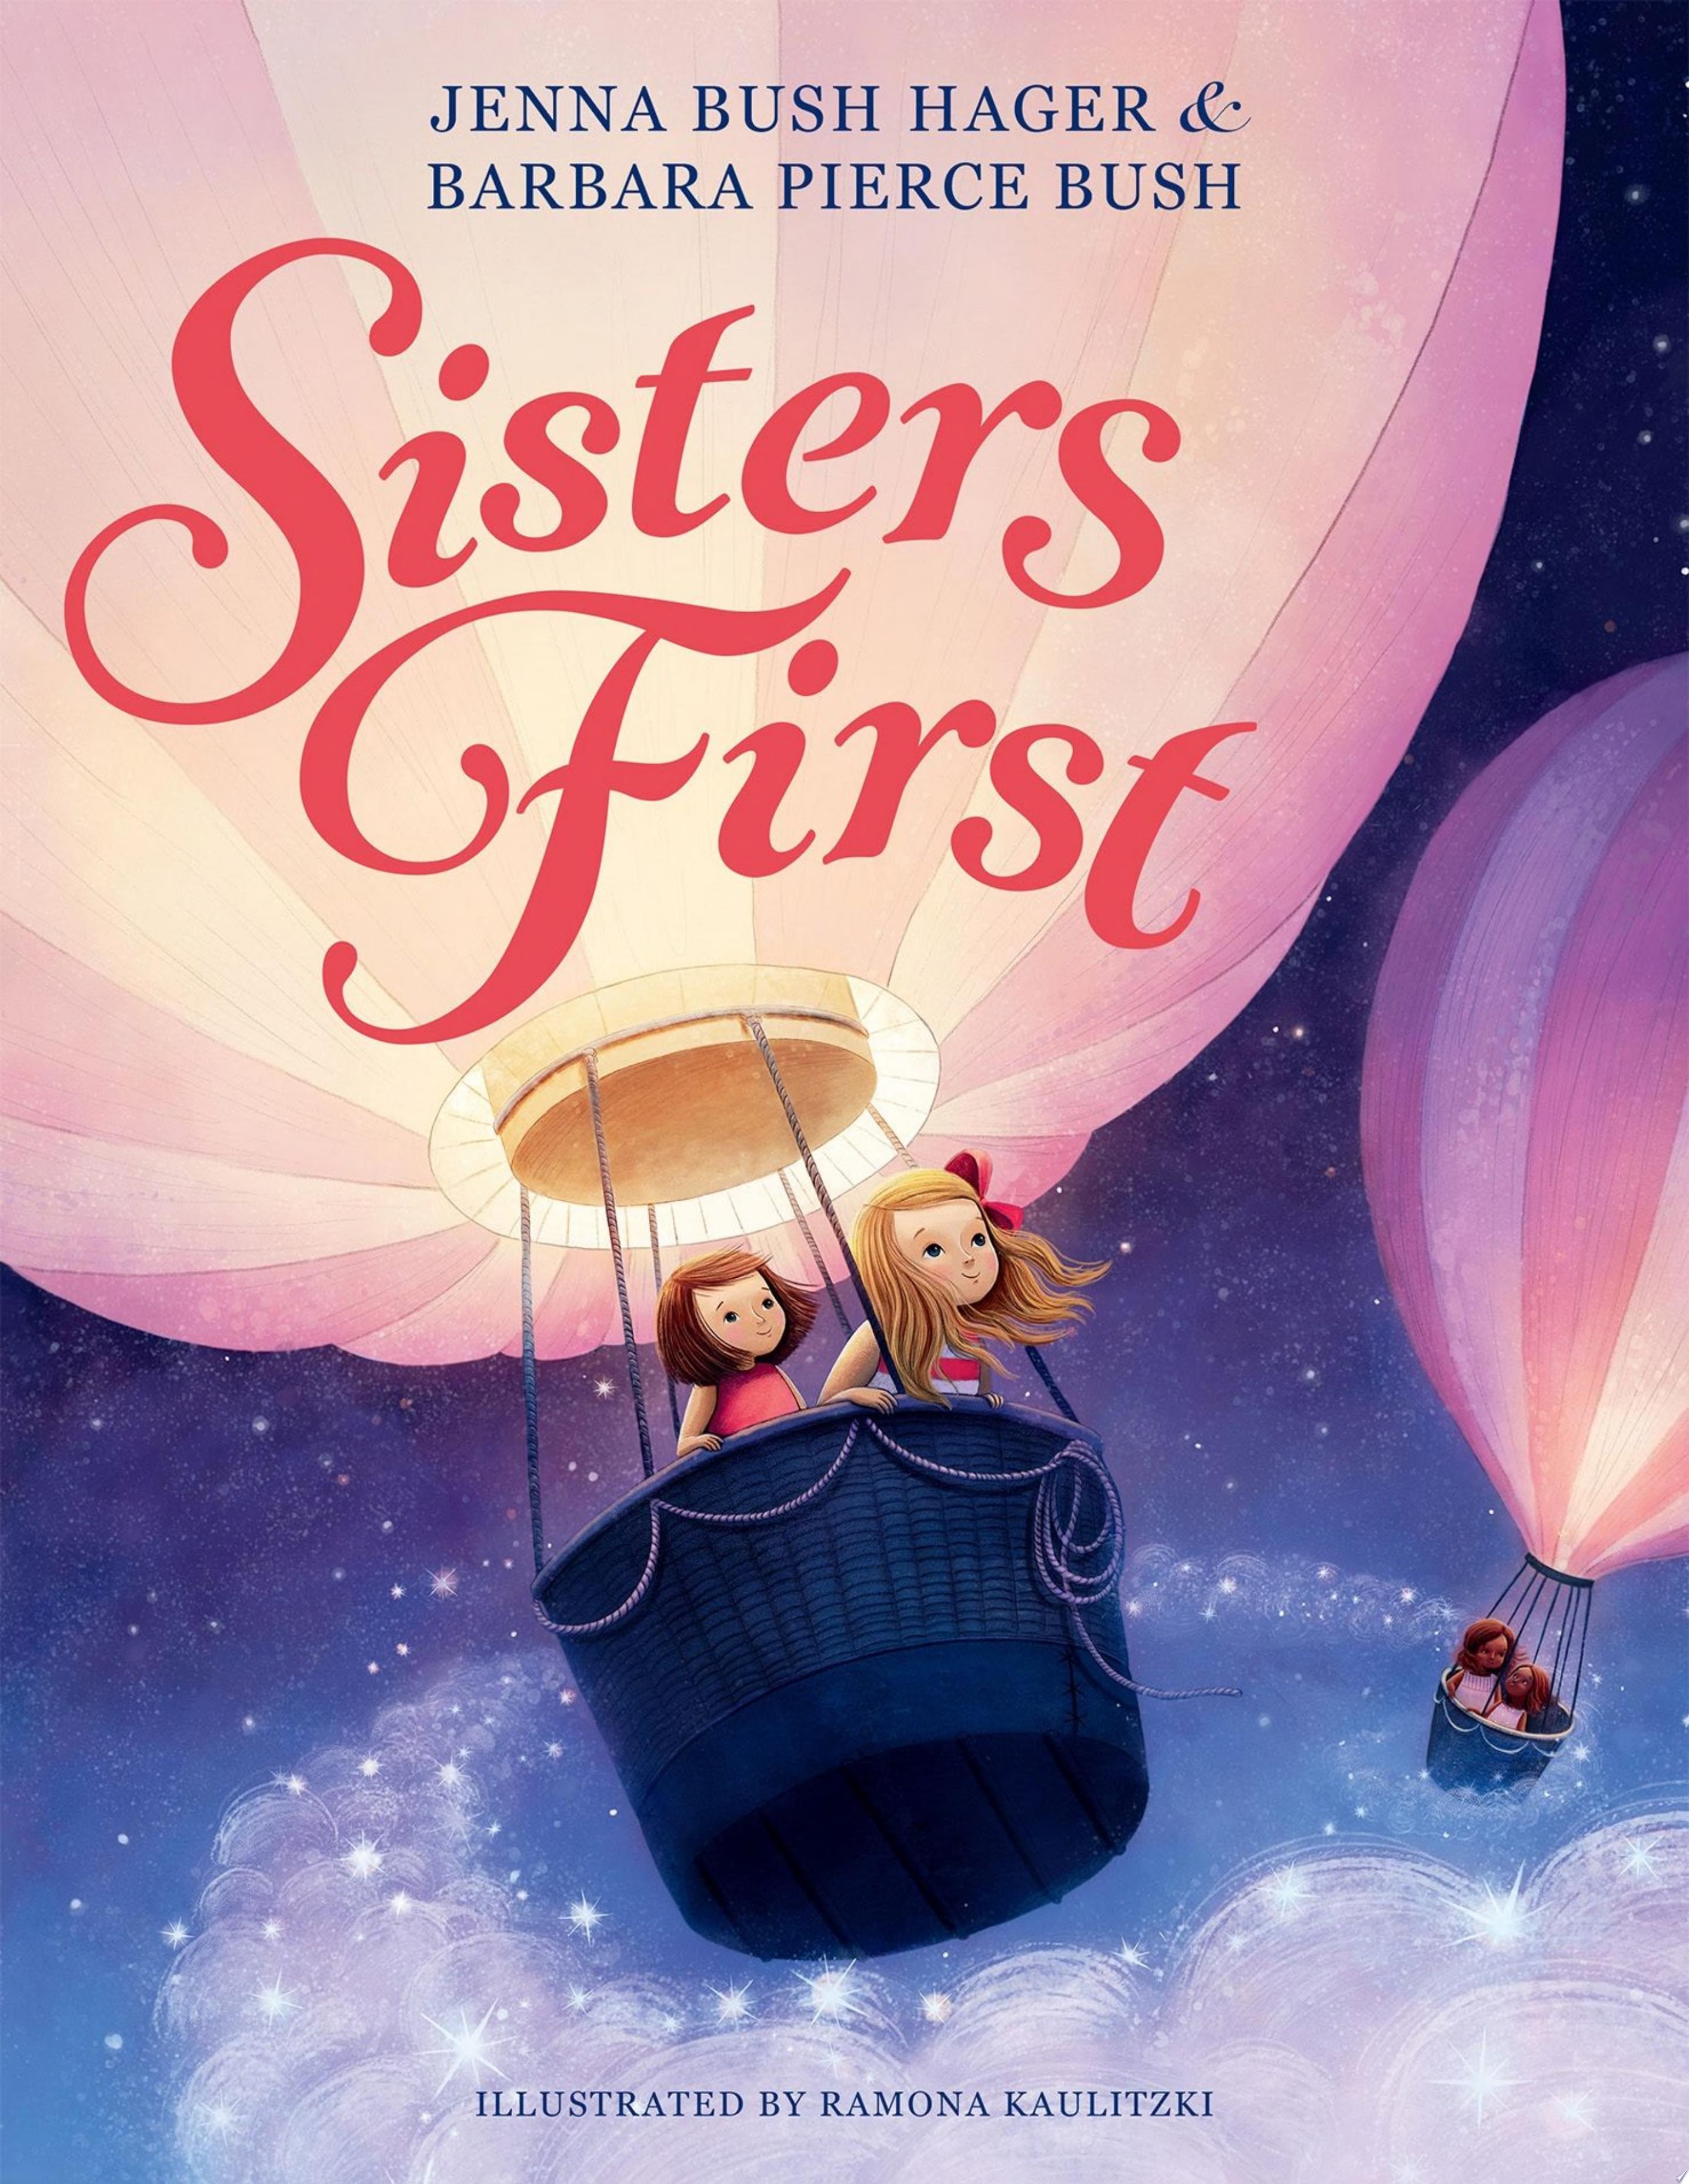 Image for "Sisters First"